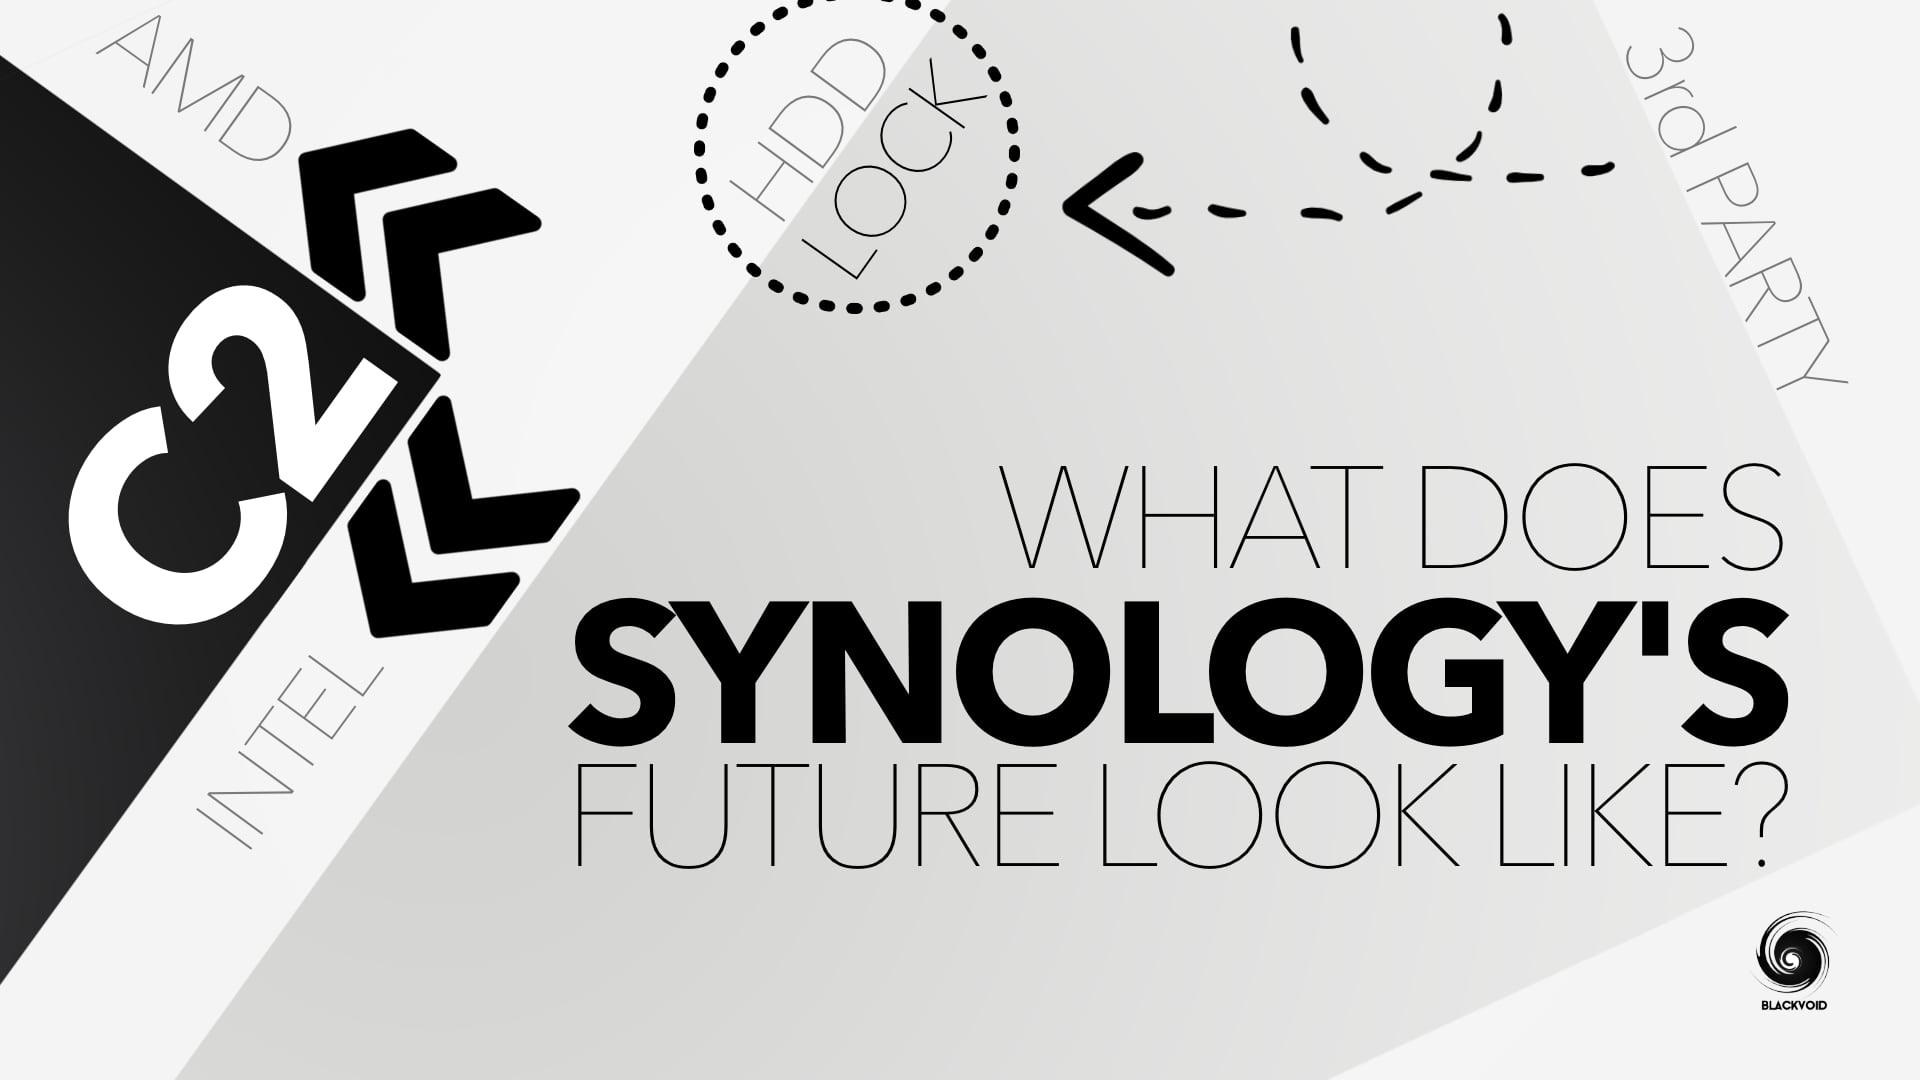 What does Synology's future look like?